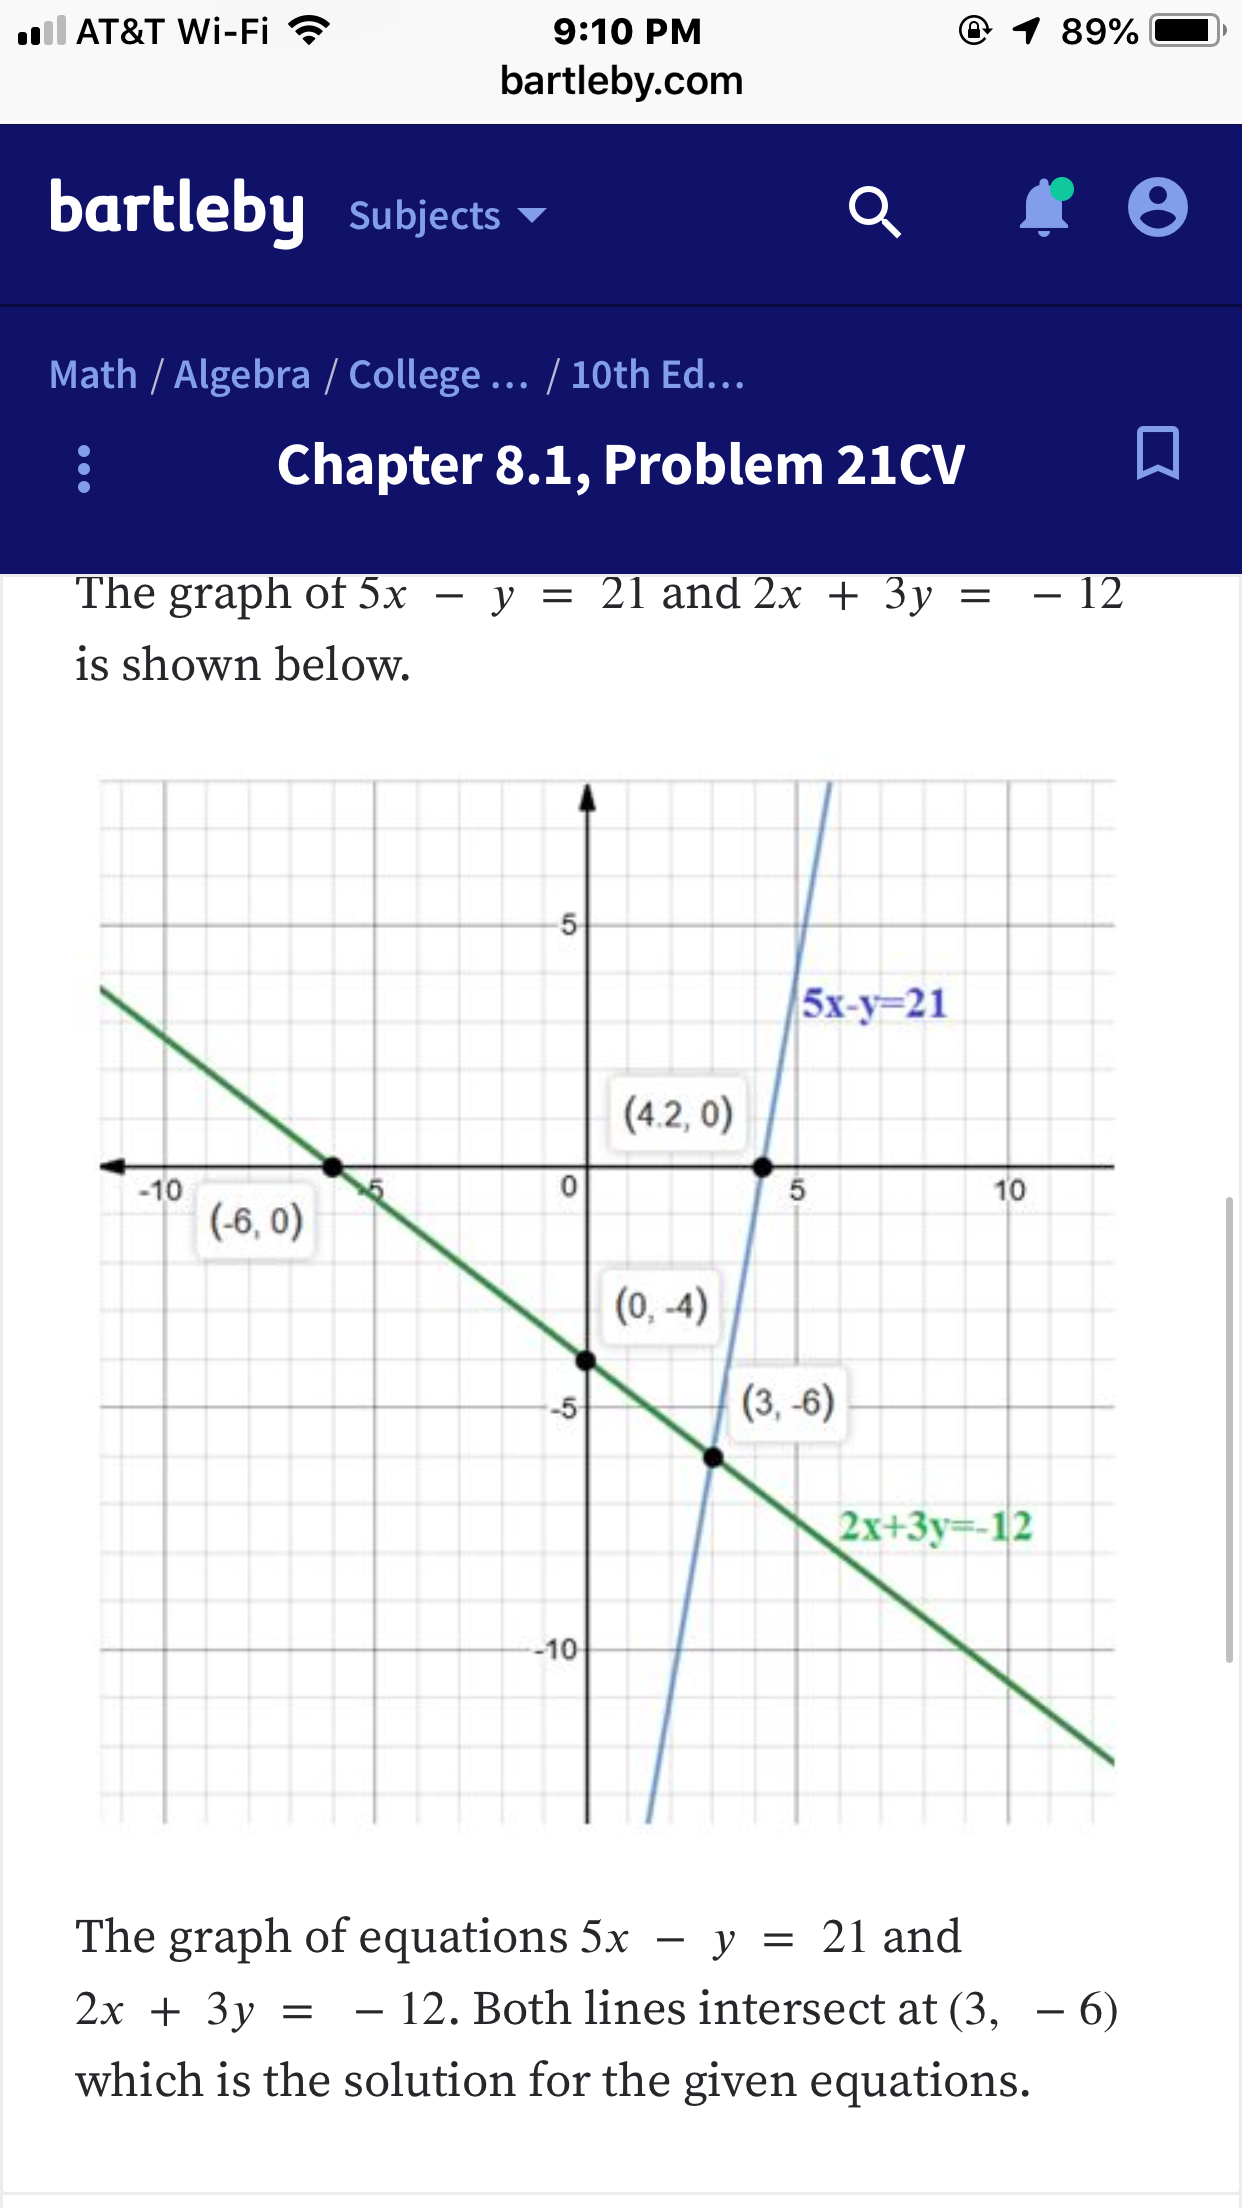 AT&T Wi-Fi
9:10 PM
bartleby.com
bartleby subjects
Math /Algebra/College.../10th Ed...
Chapter 8.1, Problem 21CV
-y
21 and 2x + 3y- - 12
The graph of x
is shown below.
5x-y 21
(4.2, 0)
10
-10
-5
2x+3y -12
-10
The graph of equations 5x - y - 21 and
2x + 3y 2. Both lines intersect at (3, - 6)
which is the solution for the given equations.
